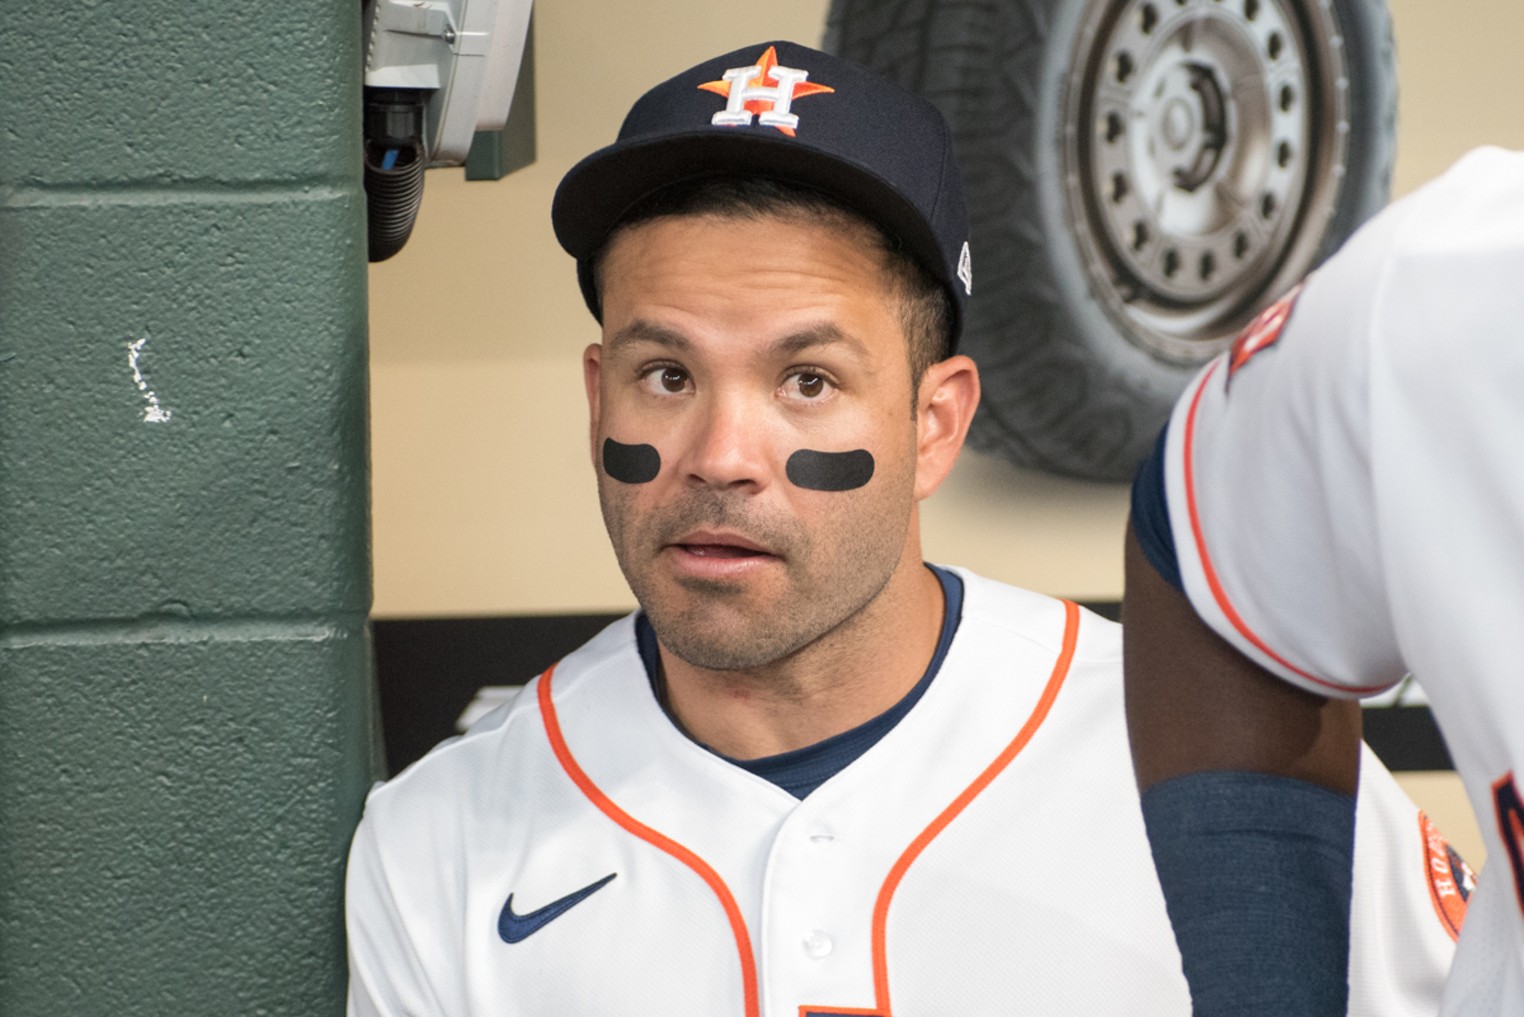 Could this be the real reason Jose Altuve didn't want his jersey